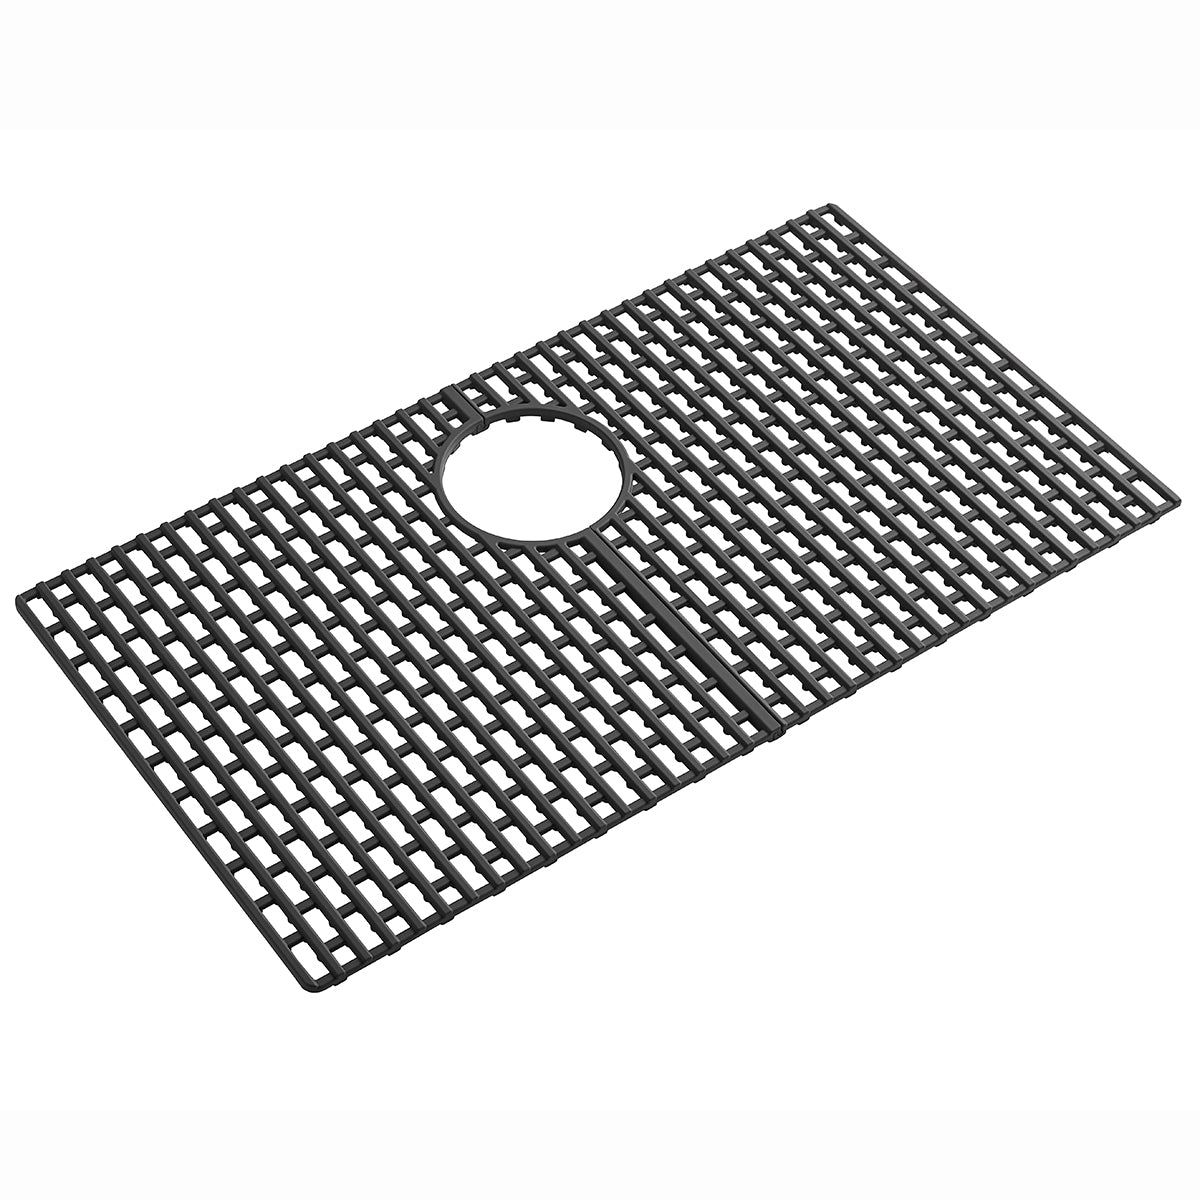 Serene Valley Silicone Kitchen Sink Protector SVSBG2815-MB, Heat Resistant  Sink Mat in Matte Black, Rear Drain 28-1/4